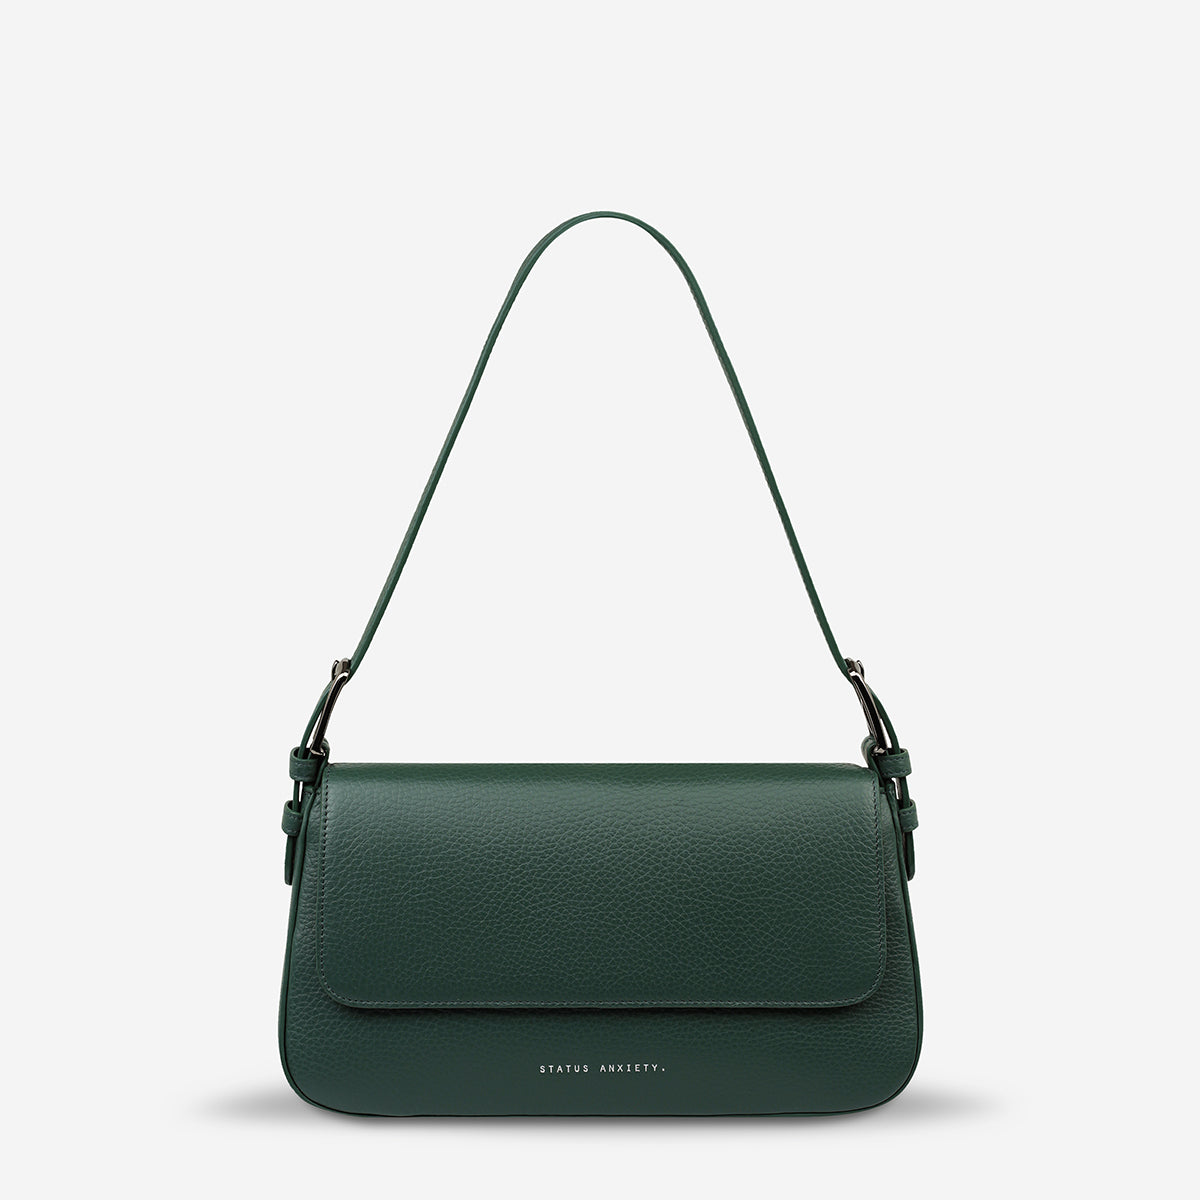 Status Anxiety Figure You Out Women's Leather Shoulder Bag Green